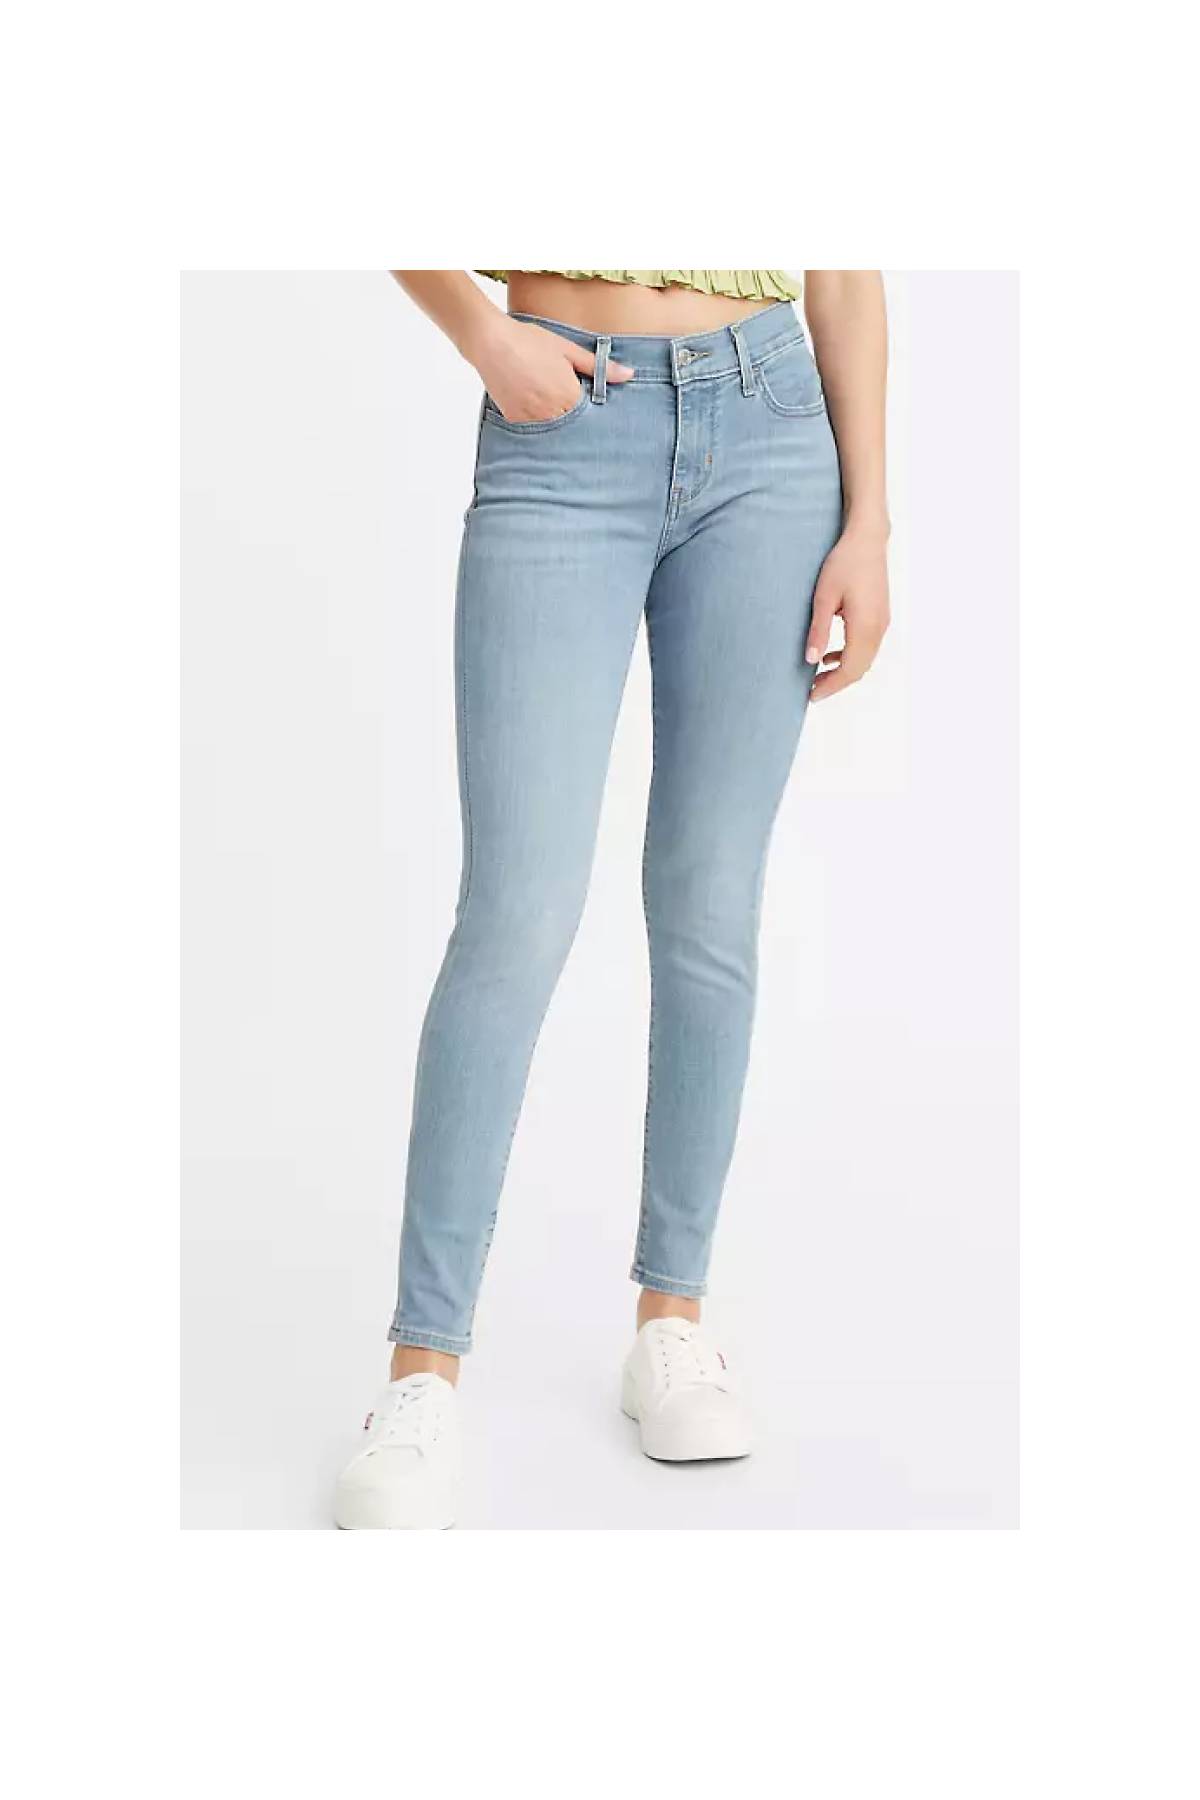 The Complete Guide to Buying Levi's Jeans for Women - Fashion Jackson